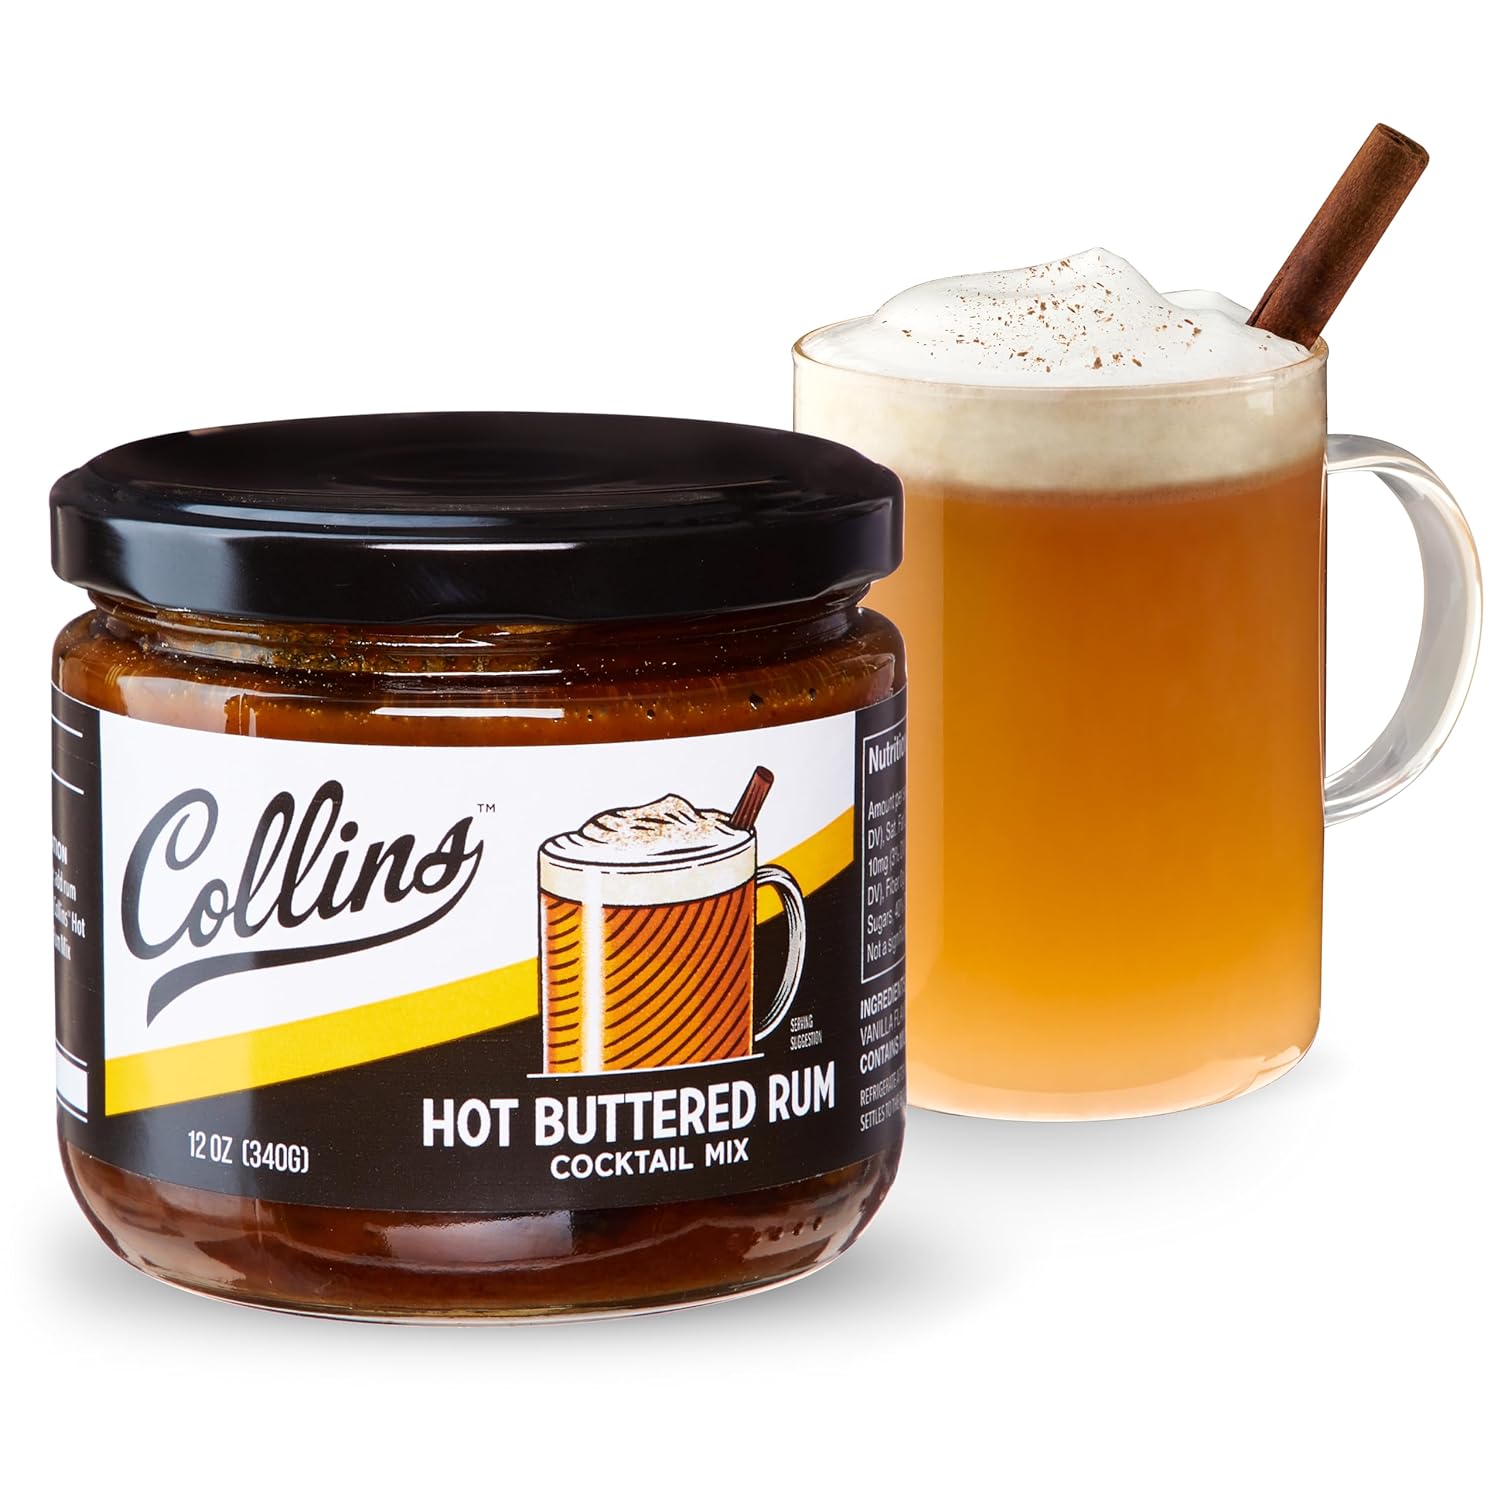 Collins Hot Buttered Rum Mix, Made With Brown Sugar and Butter with Vanilla and Rum Flavors, Hot Cocktail Recipe Ingredient, Bartender Mixer, Drinking Gifts, Home Cocktail bar, 12 fl oz